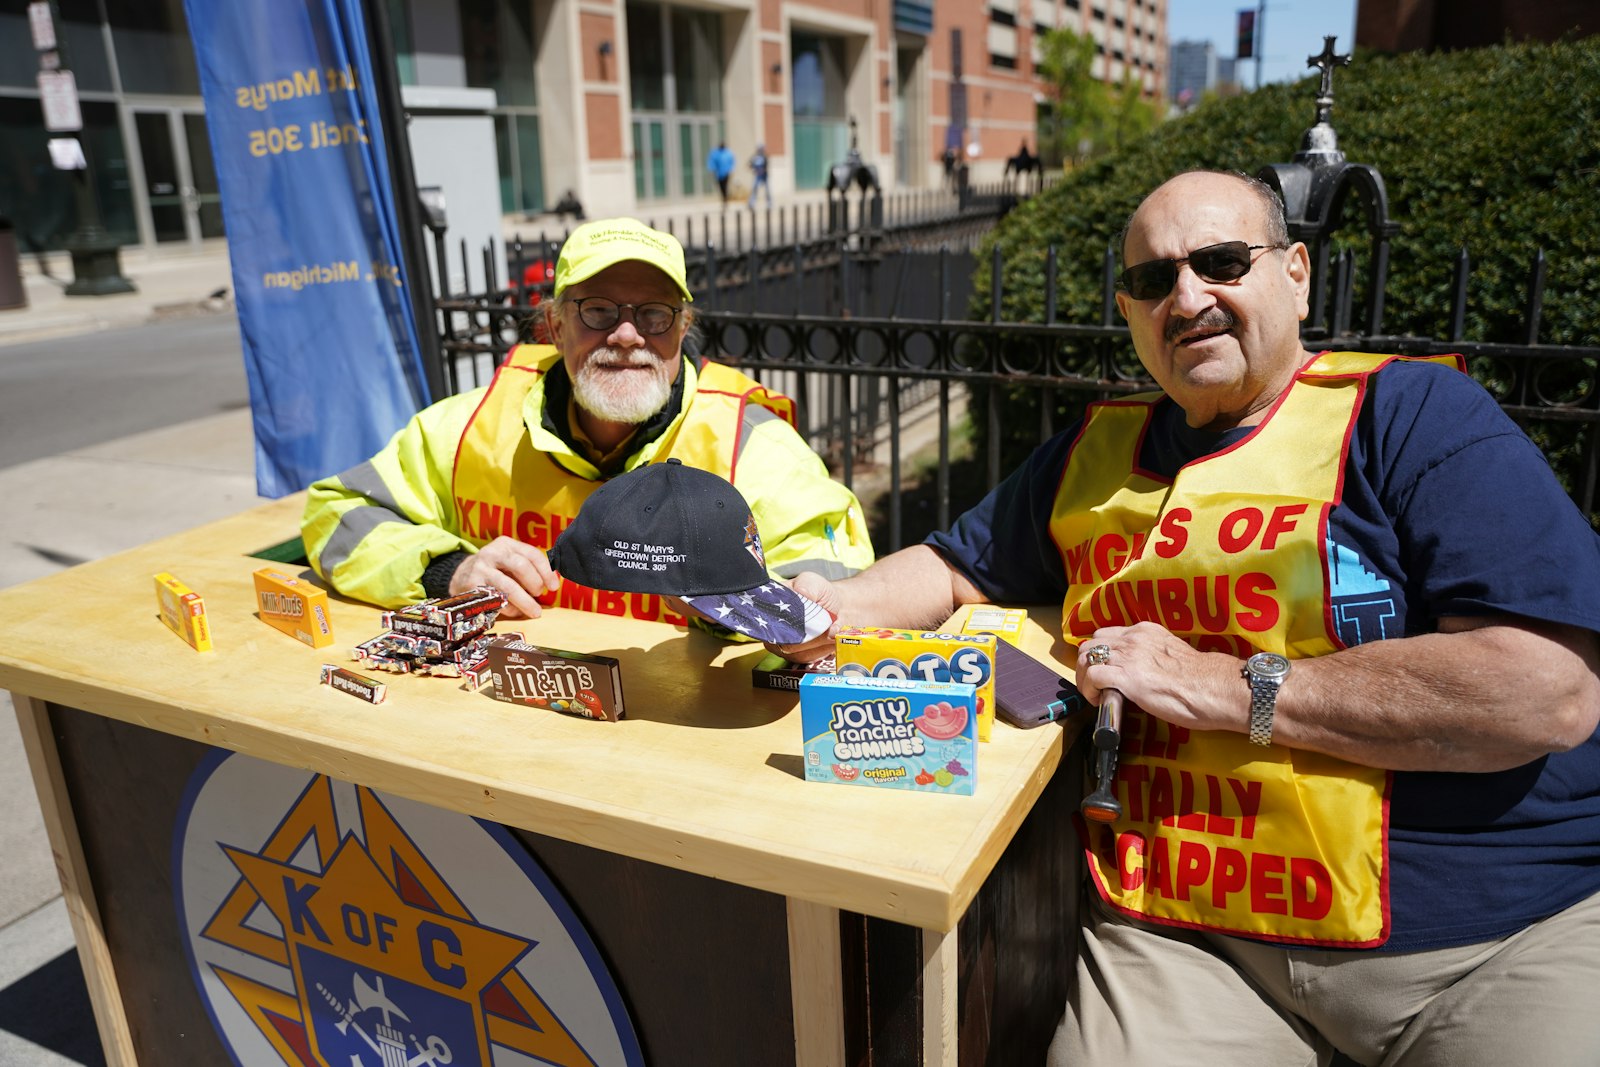 Andrew Assenmacher and Vito Lena of Knight of Columbus Council 305 at Old St. Mary's Parish in Greektown were hosting the Knights' annual Tootsie Roll drive on the church's campus and inviting people to tour the historic church.